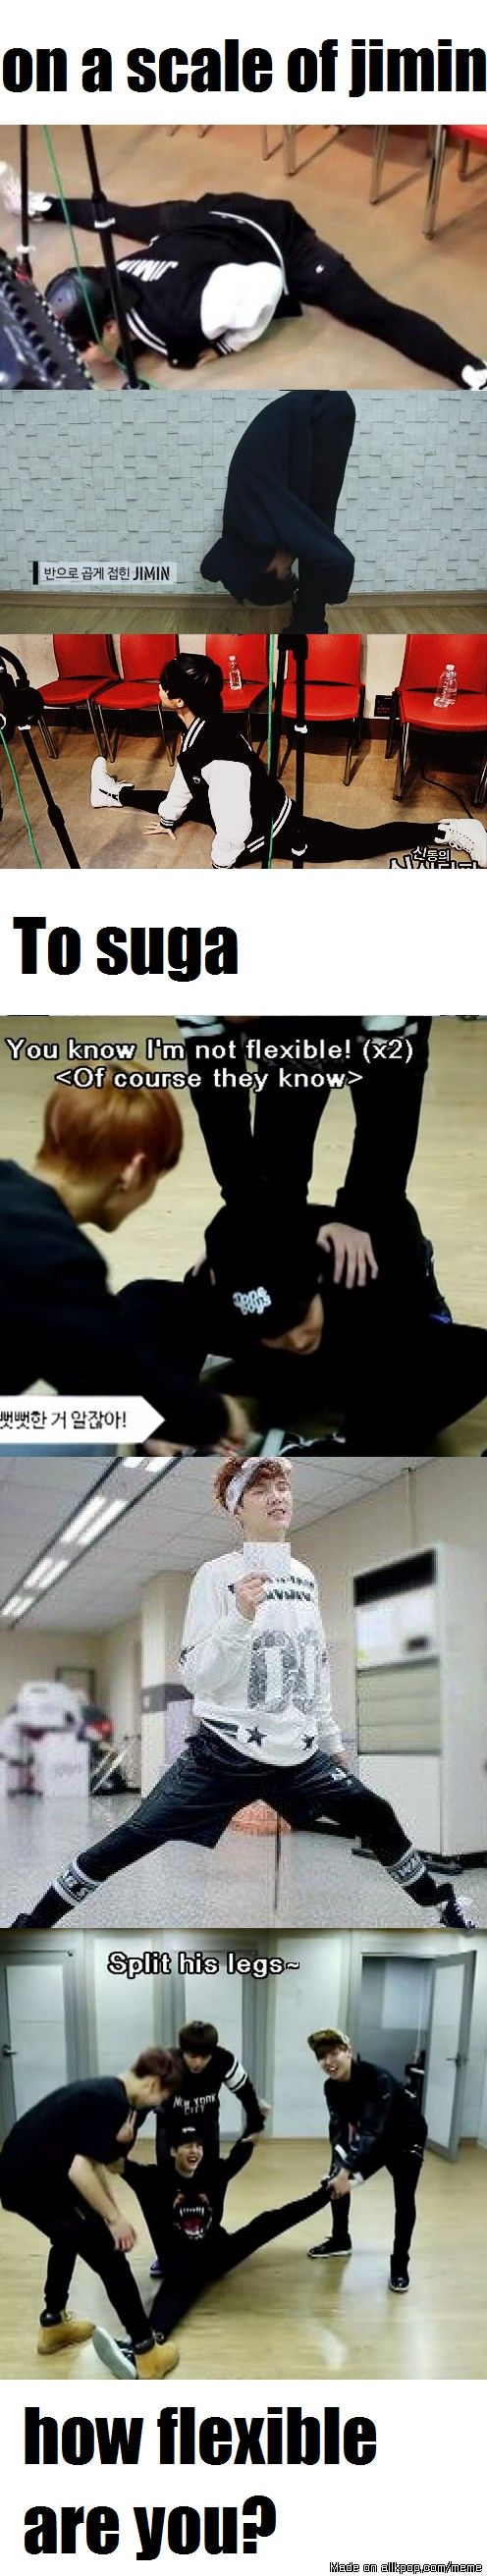 Sadly, I think I am worst then SUGA. X)  Proud to say that I’m at least Jimin level! ……. I mean…. not to boast or anything